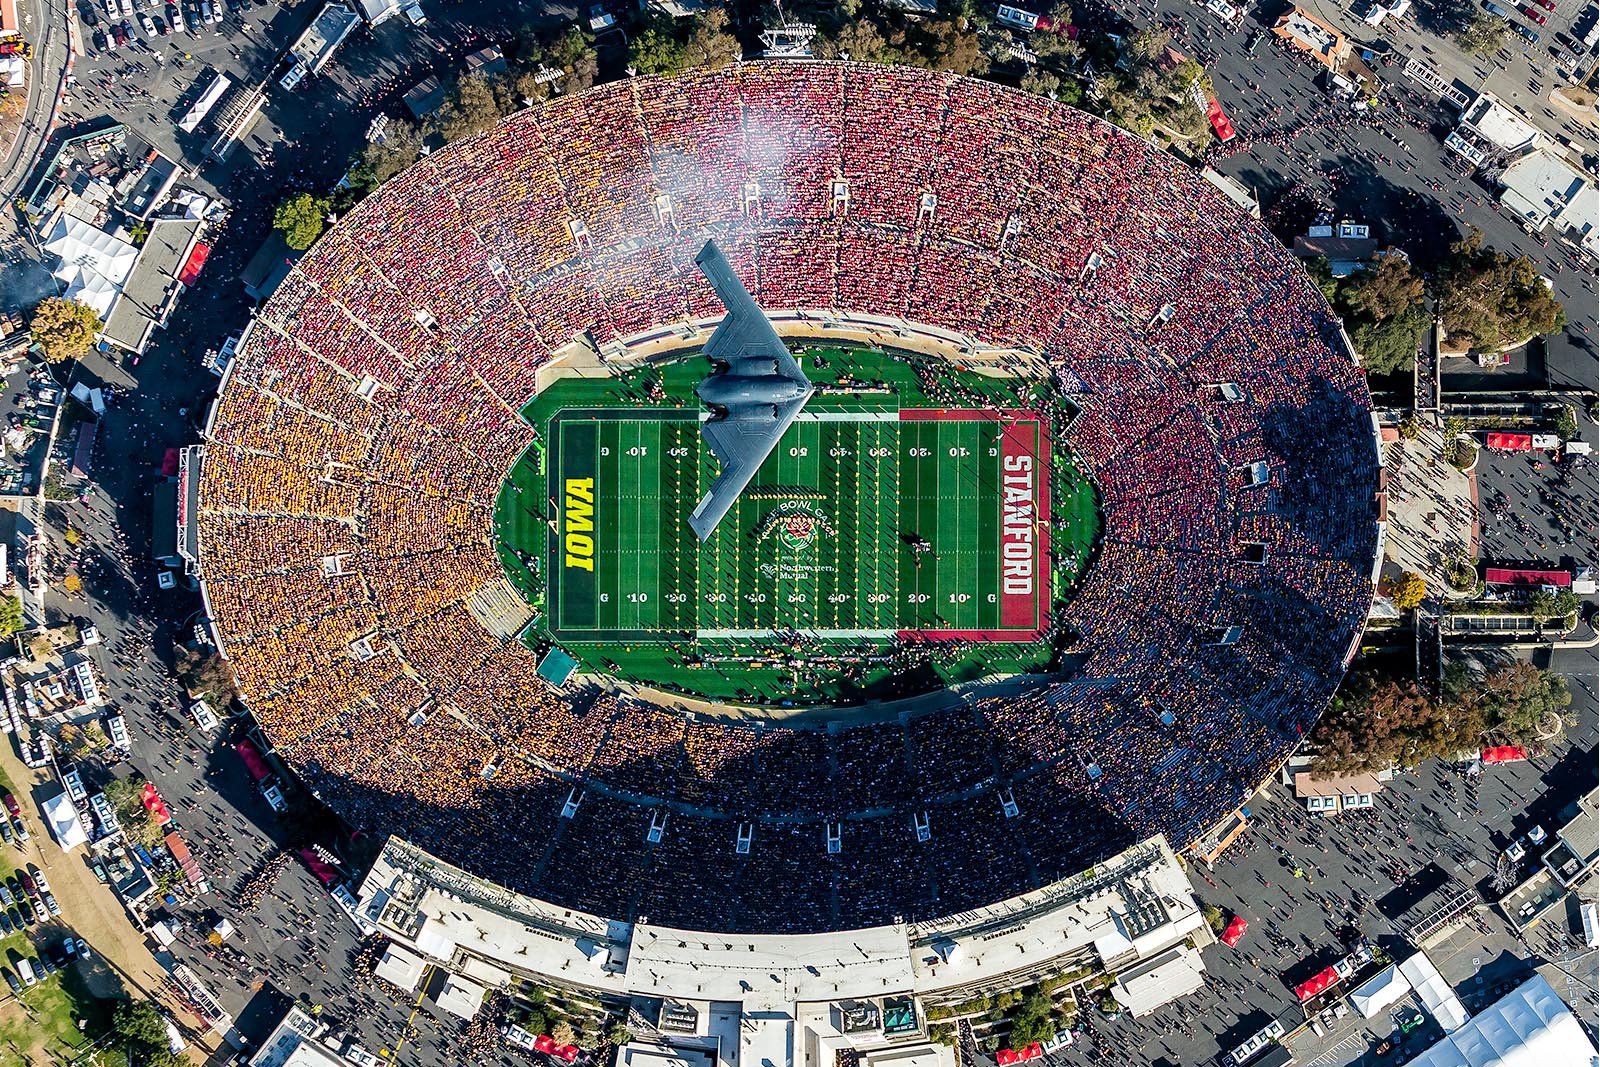 Mark Holtzman's B2 Flying over the Rose Bowl Game Photo Featured in